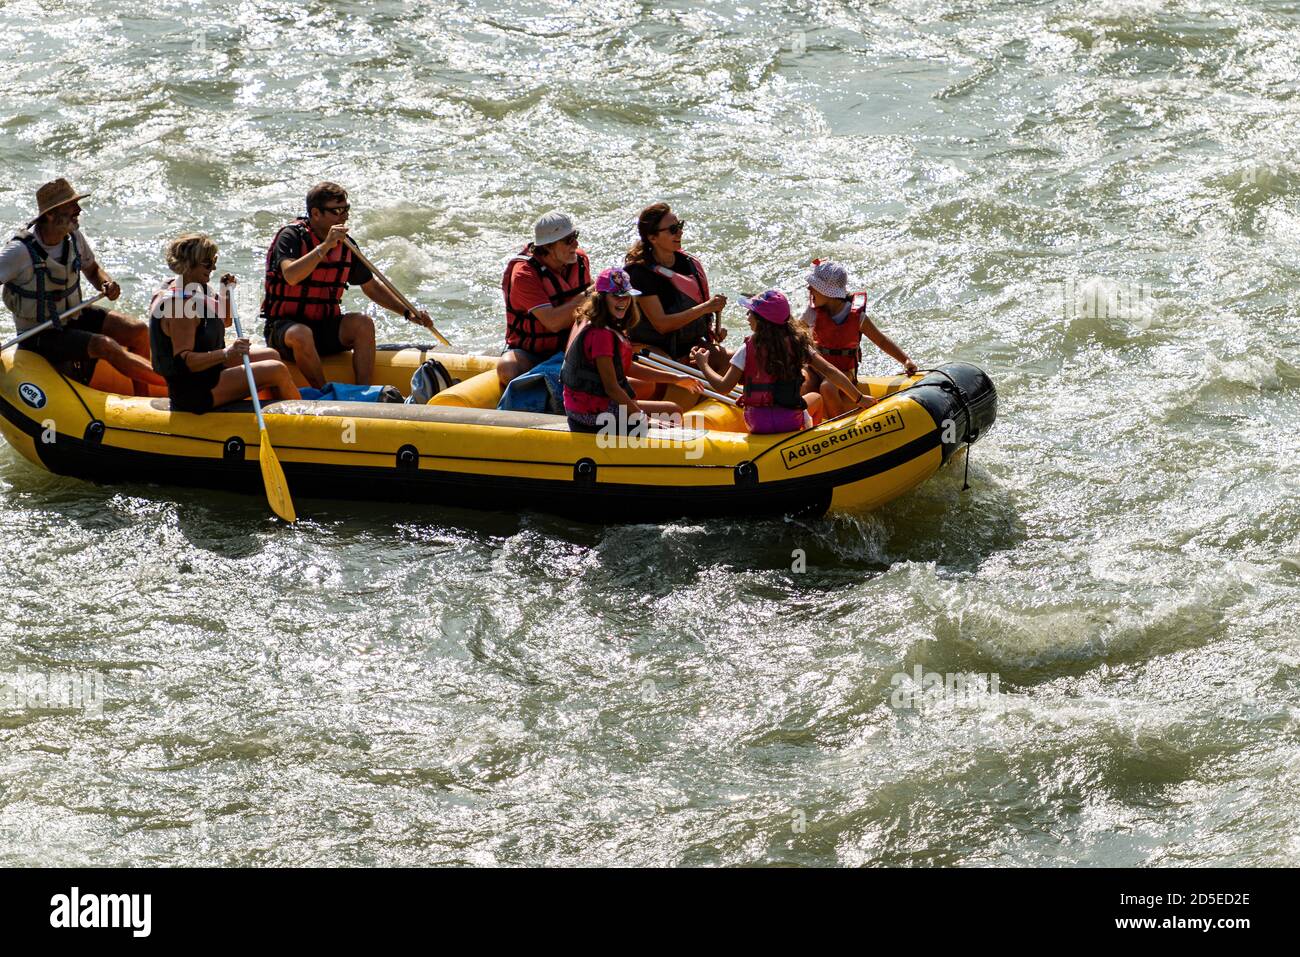 Rafting on white water, a group of people, children and adults, with an instructor on an inflatable raft in the River Adige in Verona downtown, Italy. Stock Photo